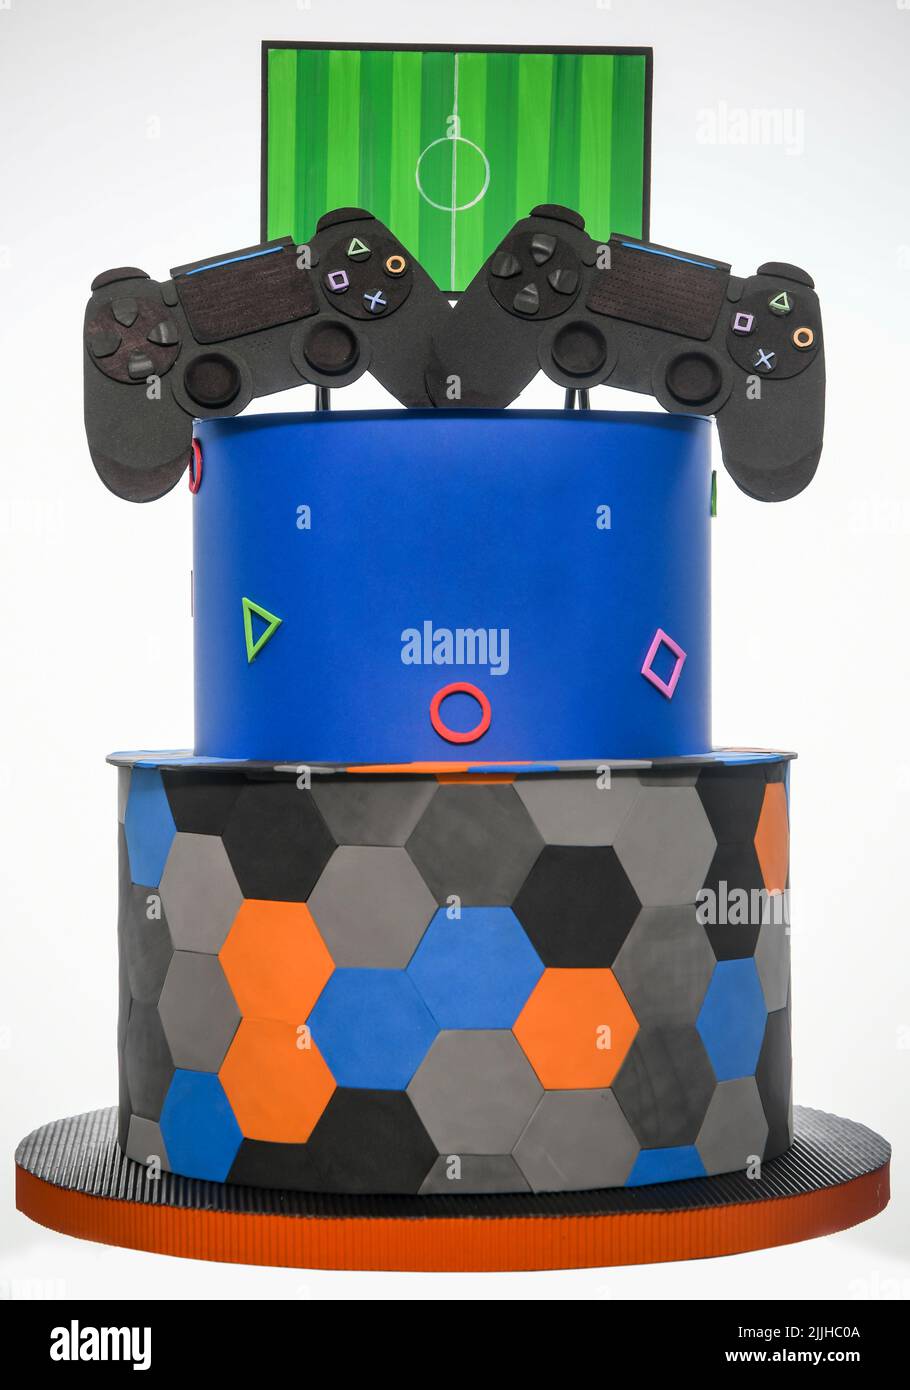 Bolo Video Game PS4  Playstation cake, Party cakes, Baby shower cakes